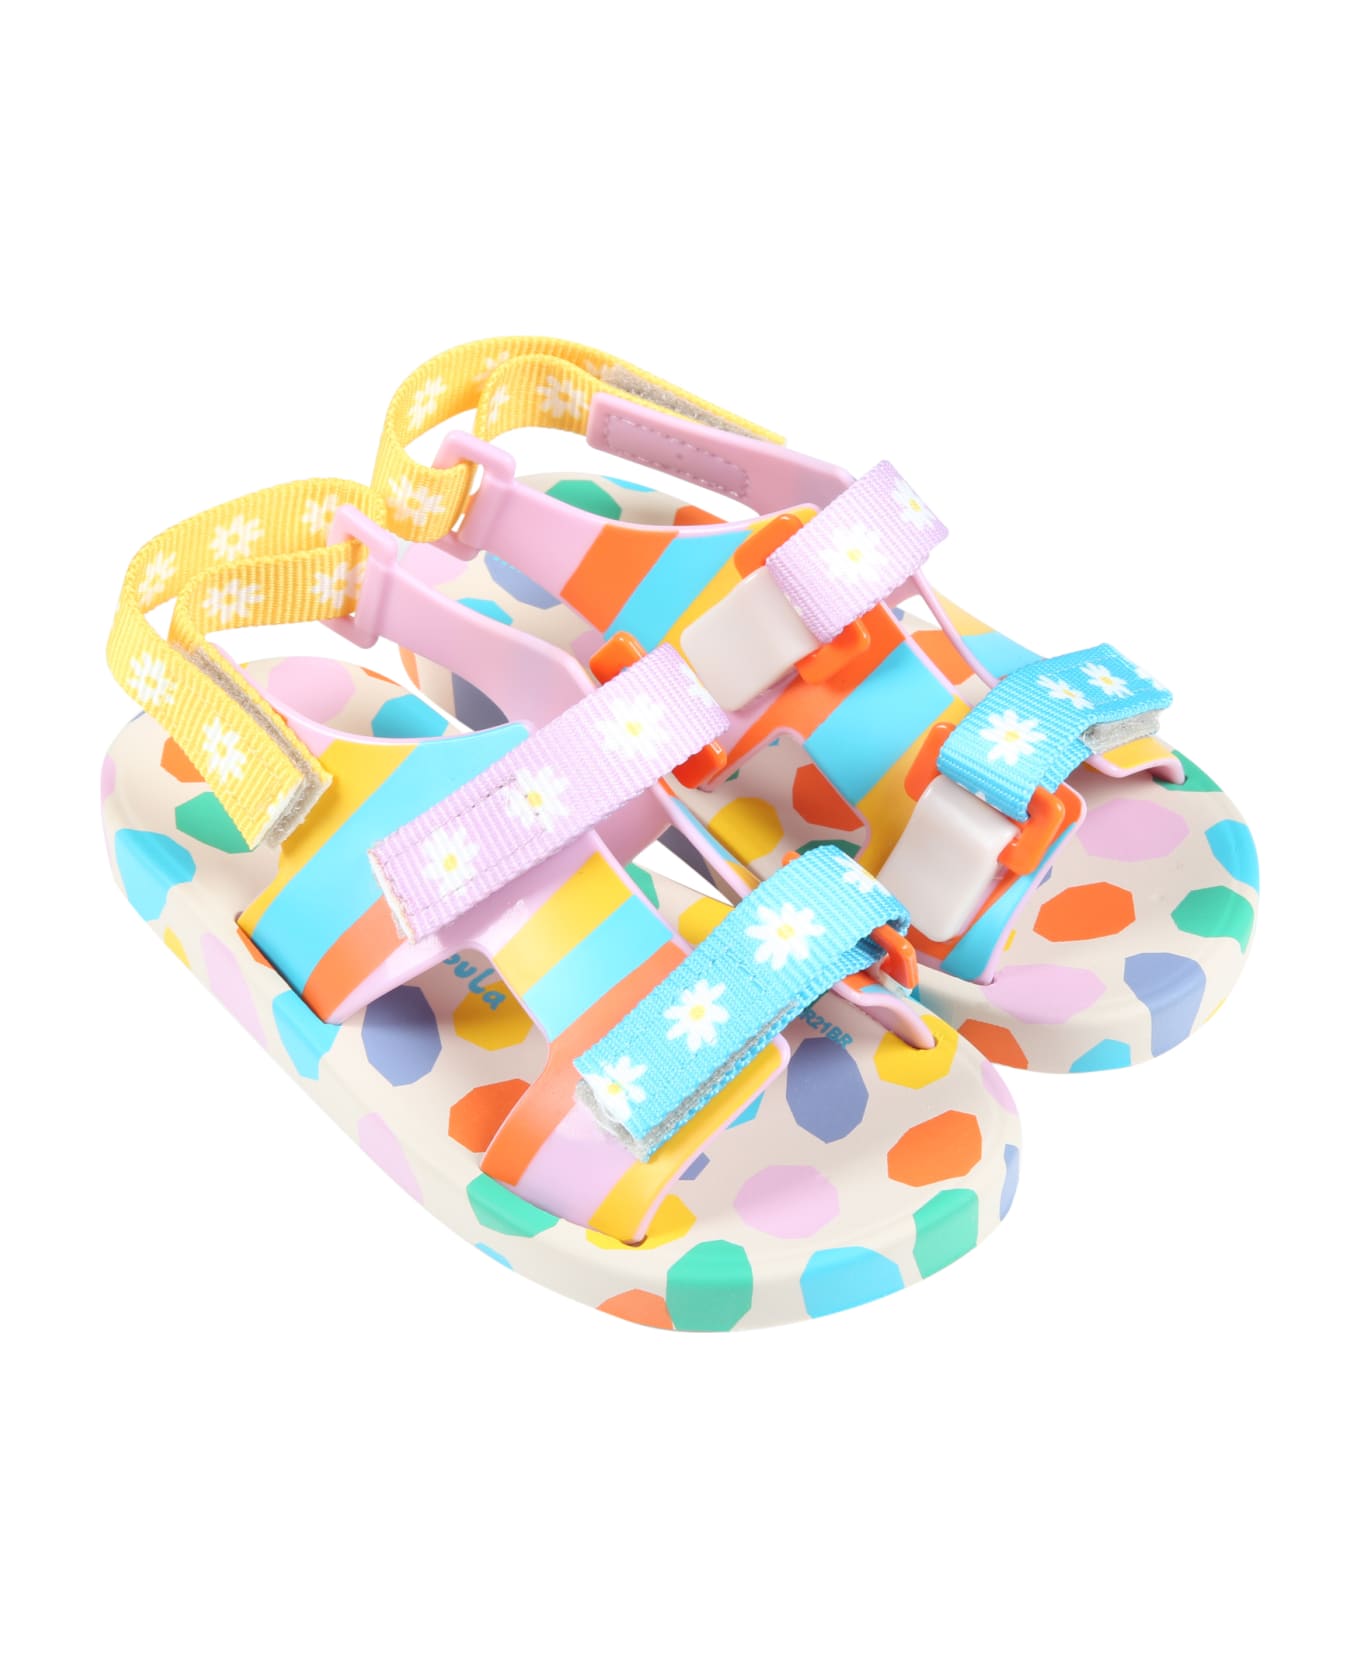 Melissa Multicolor Sandals For Kids With Prints - Multicolor